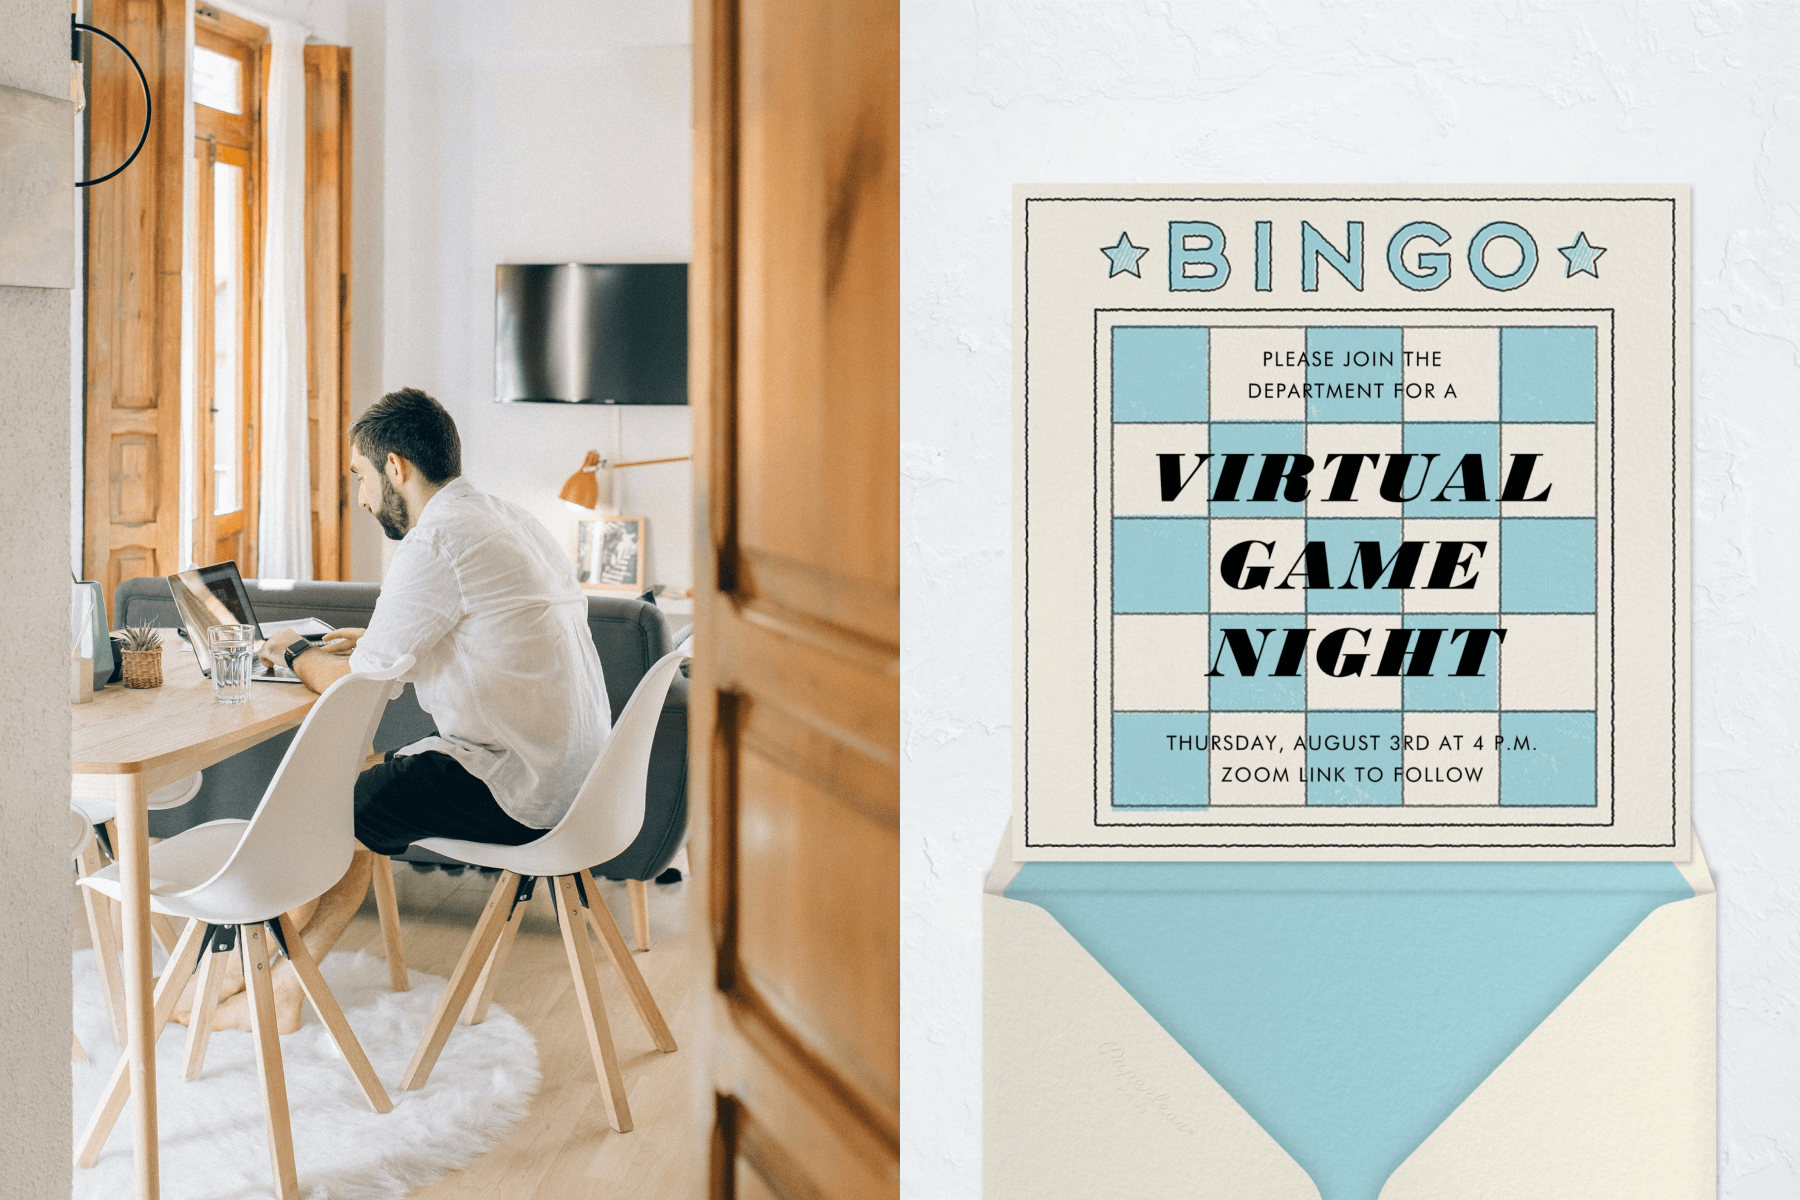 Left: A side view of a man working in his home at a table; Right: A virtual game night invitation that looks like a bingo card.